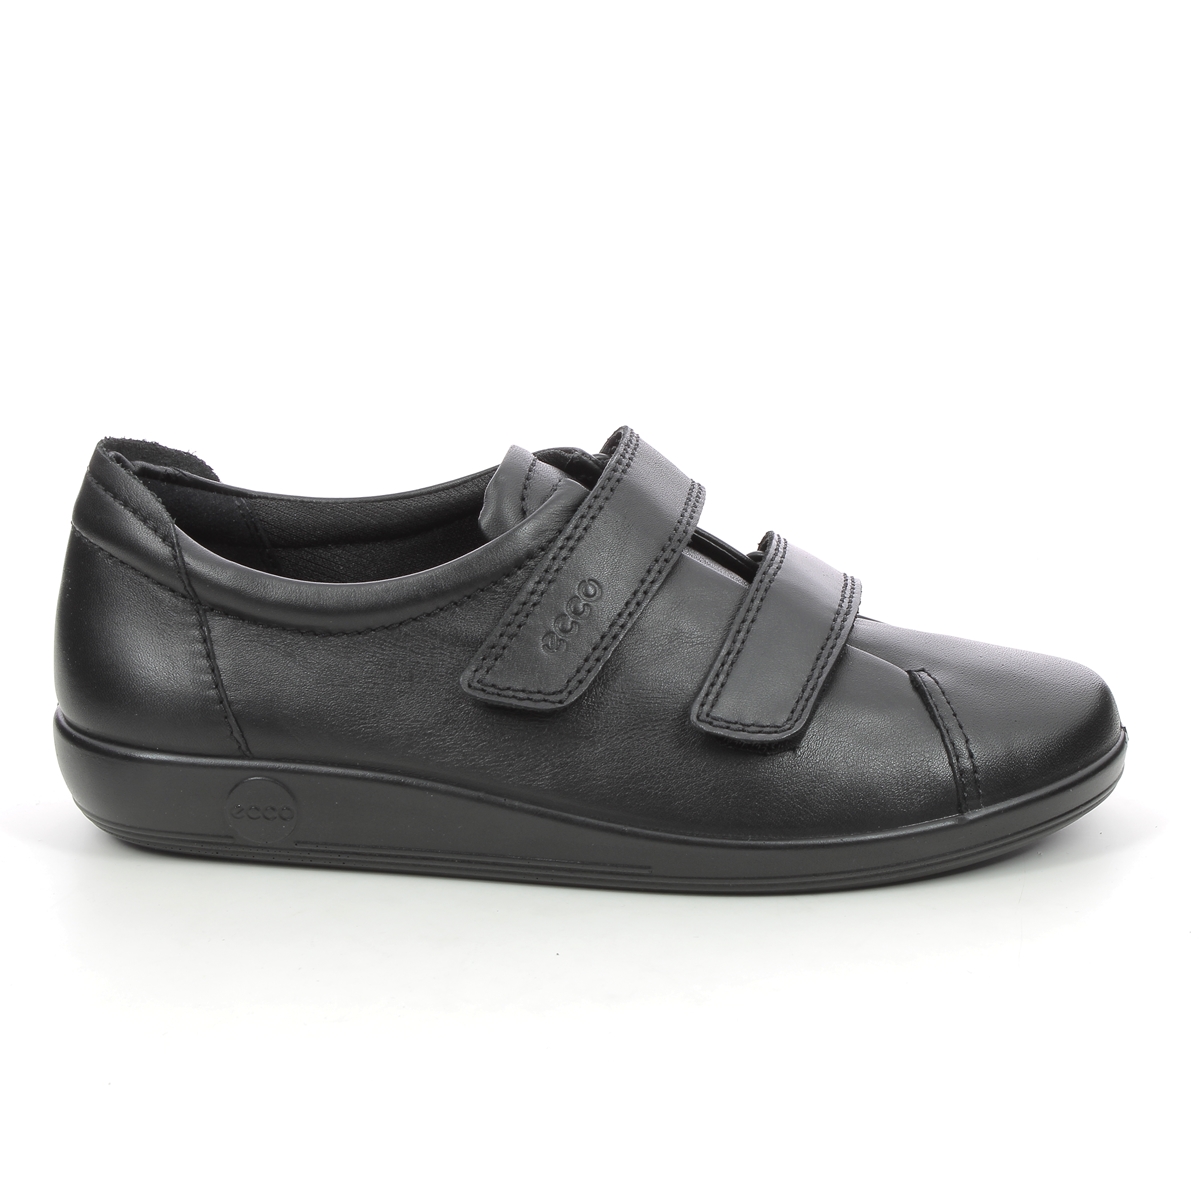 ecco women's shoes with velcro